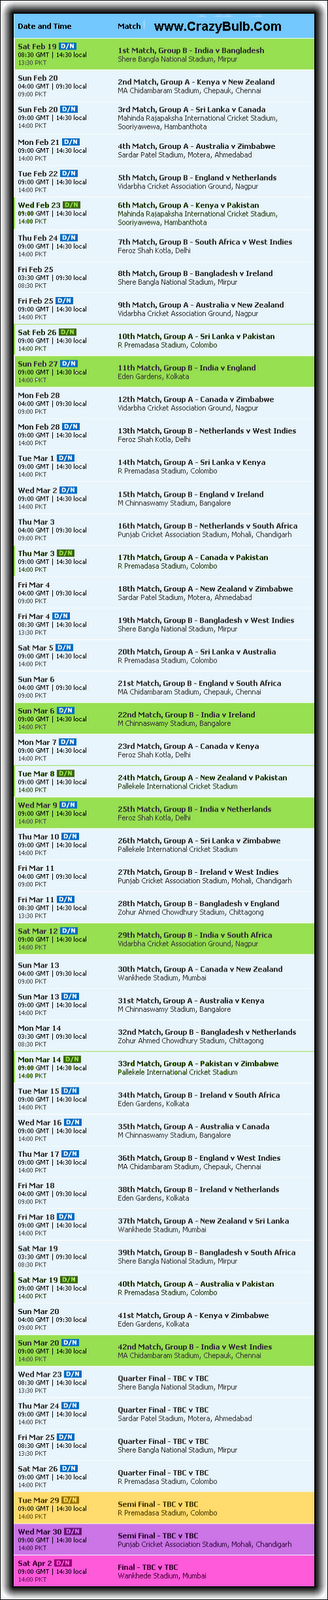 world cup 2011 schedule with time. World Cup 2011 Schedule - Page